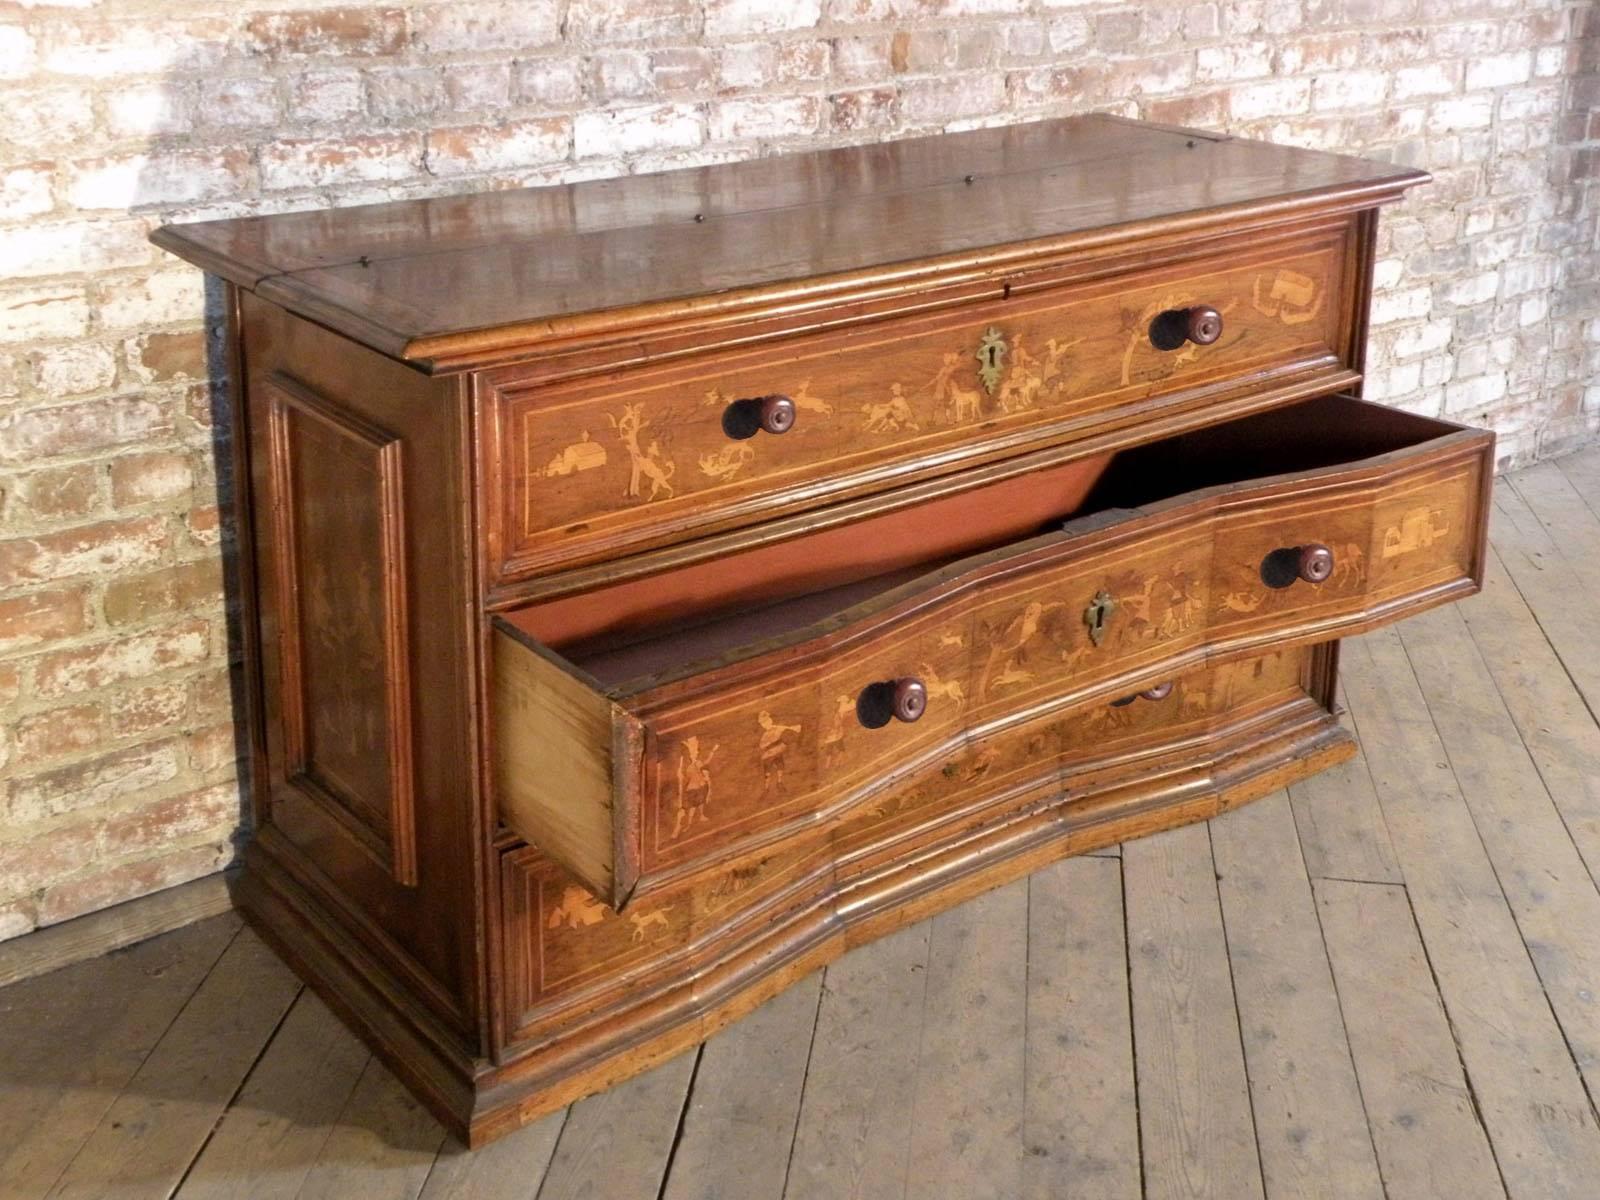 Inlay Italian Baroque Inlaid Early 18th Century Walnut and Fruit Wood Desk-Commode For Sale